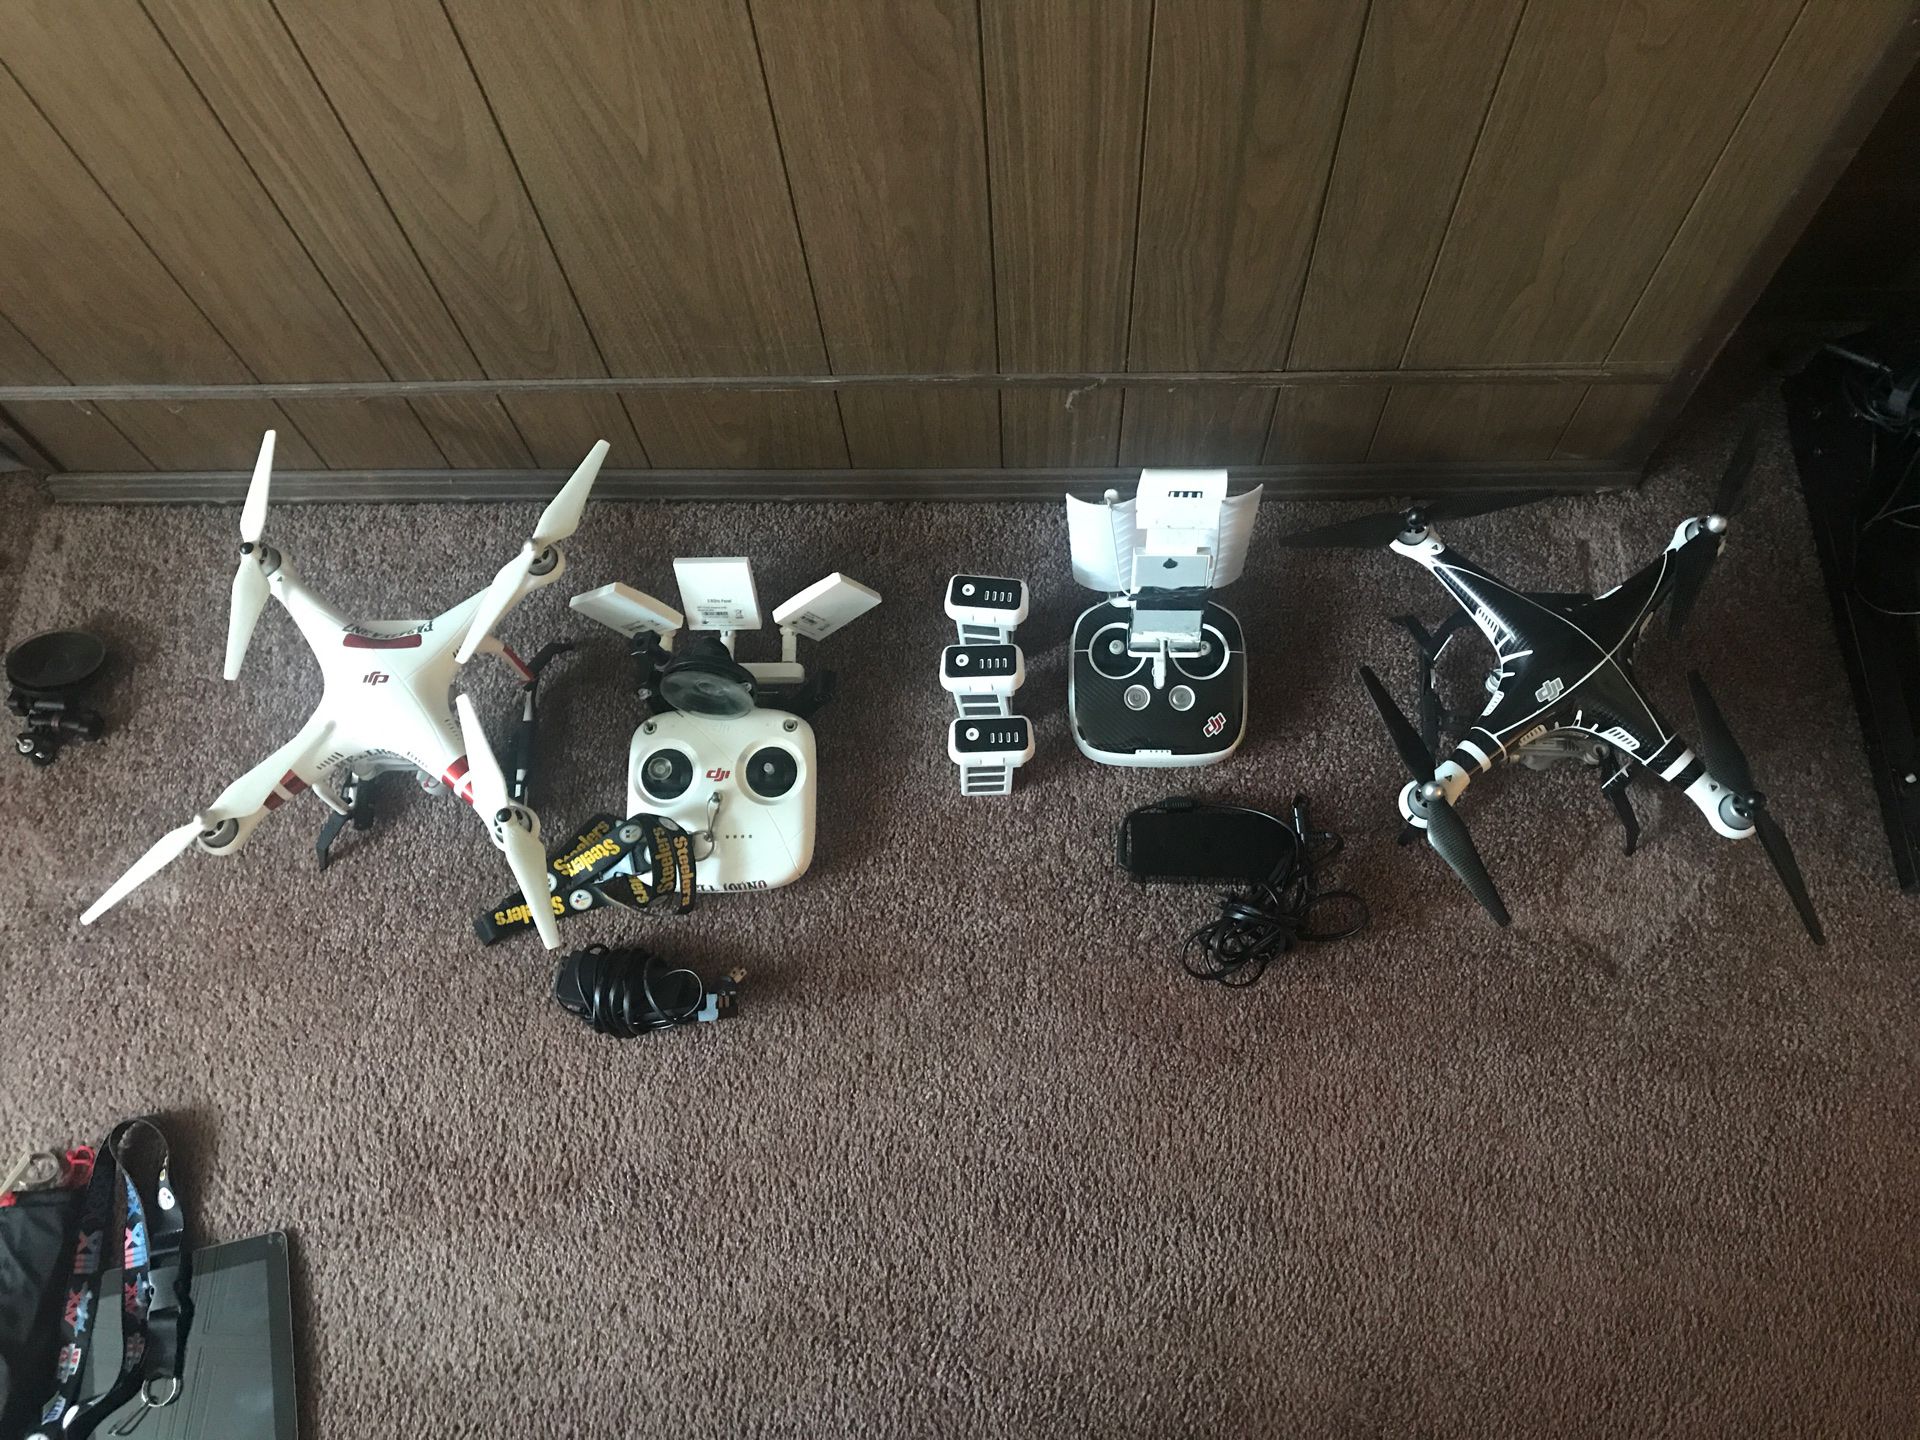 DJI PHANTOM 3 standard and PHANTOM 3 PRO 2 controllers 3 batteries 2 chargers and 3 more antennas for the standard not shown in photos